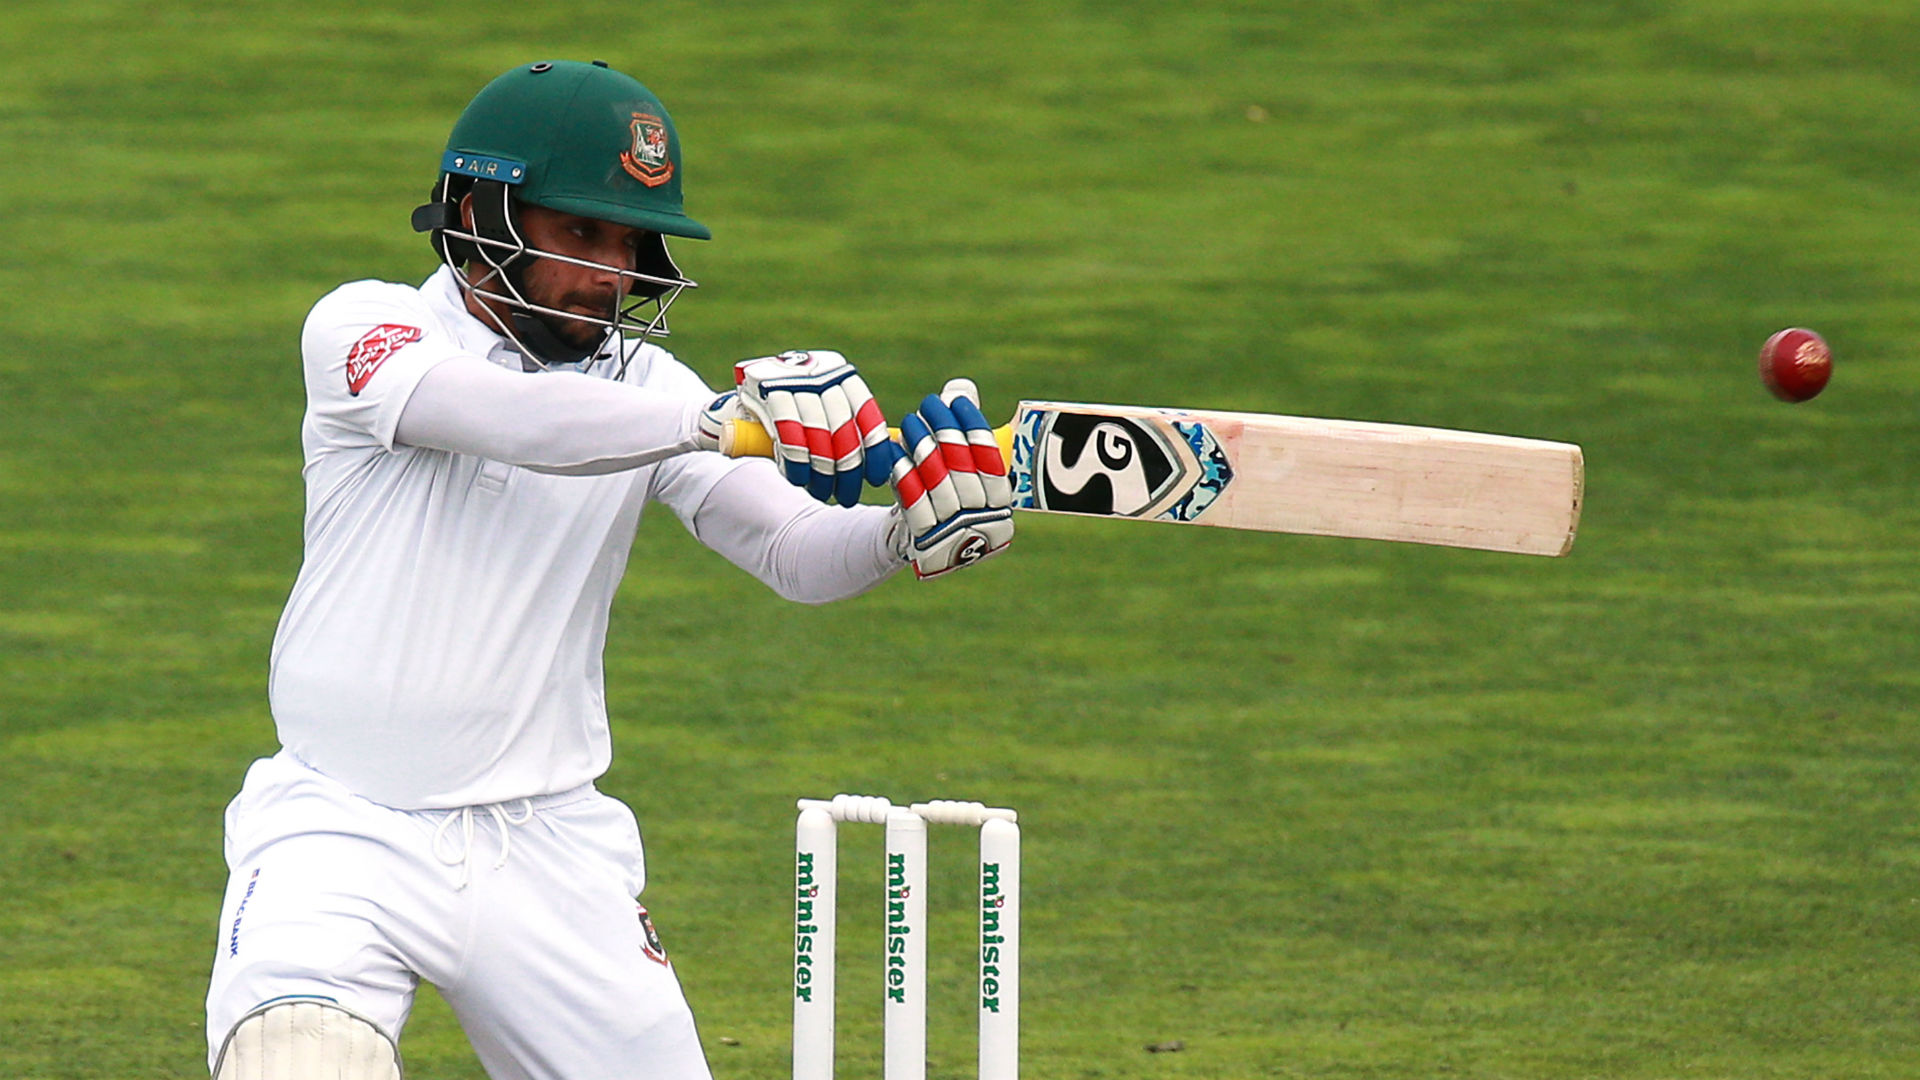 Mominul Haque finished day two unbeaten on 79 as Bangladesh trimmed Zimbabwe's first-innings lead to just 25.